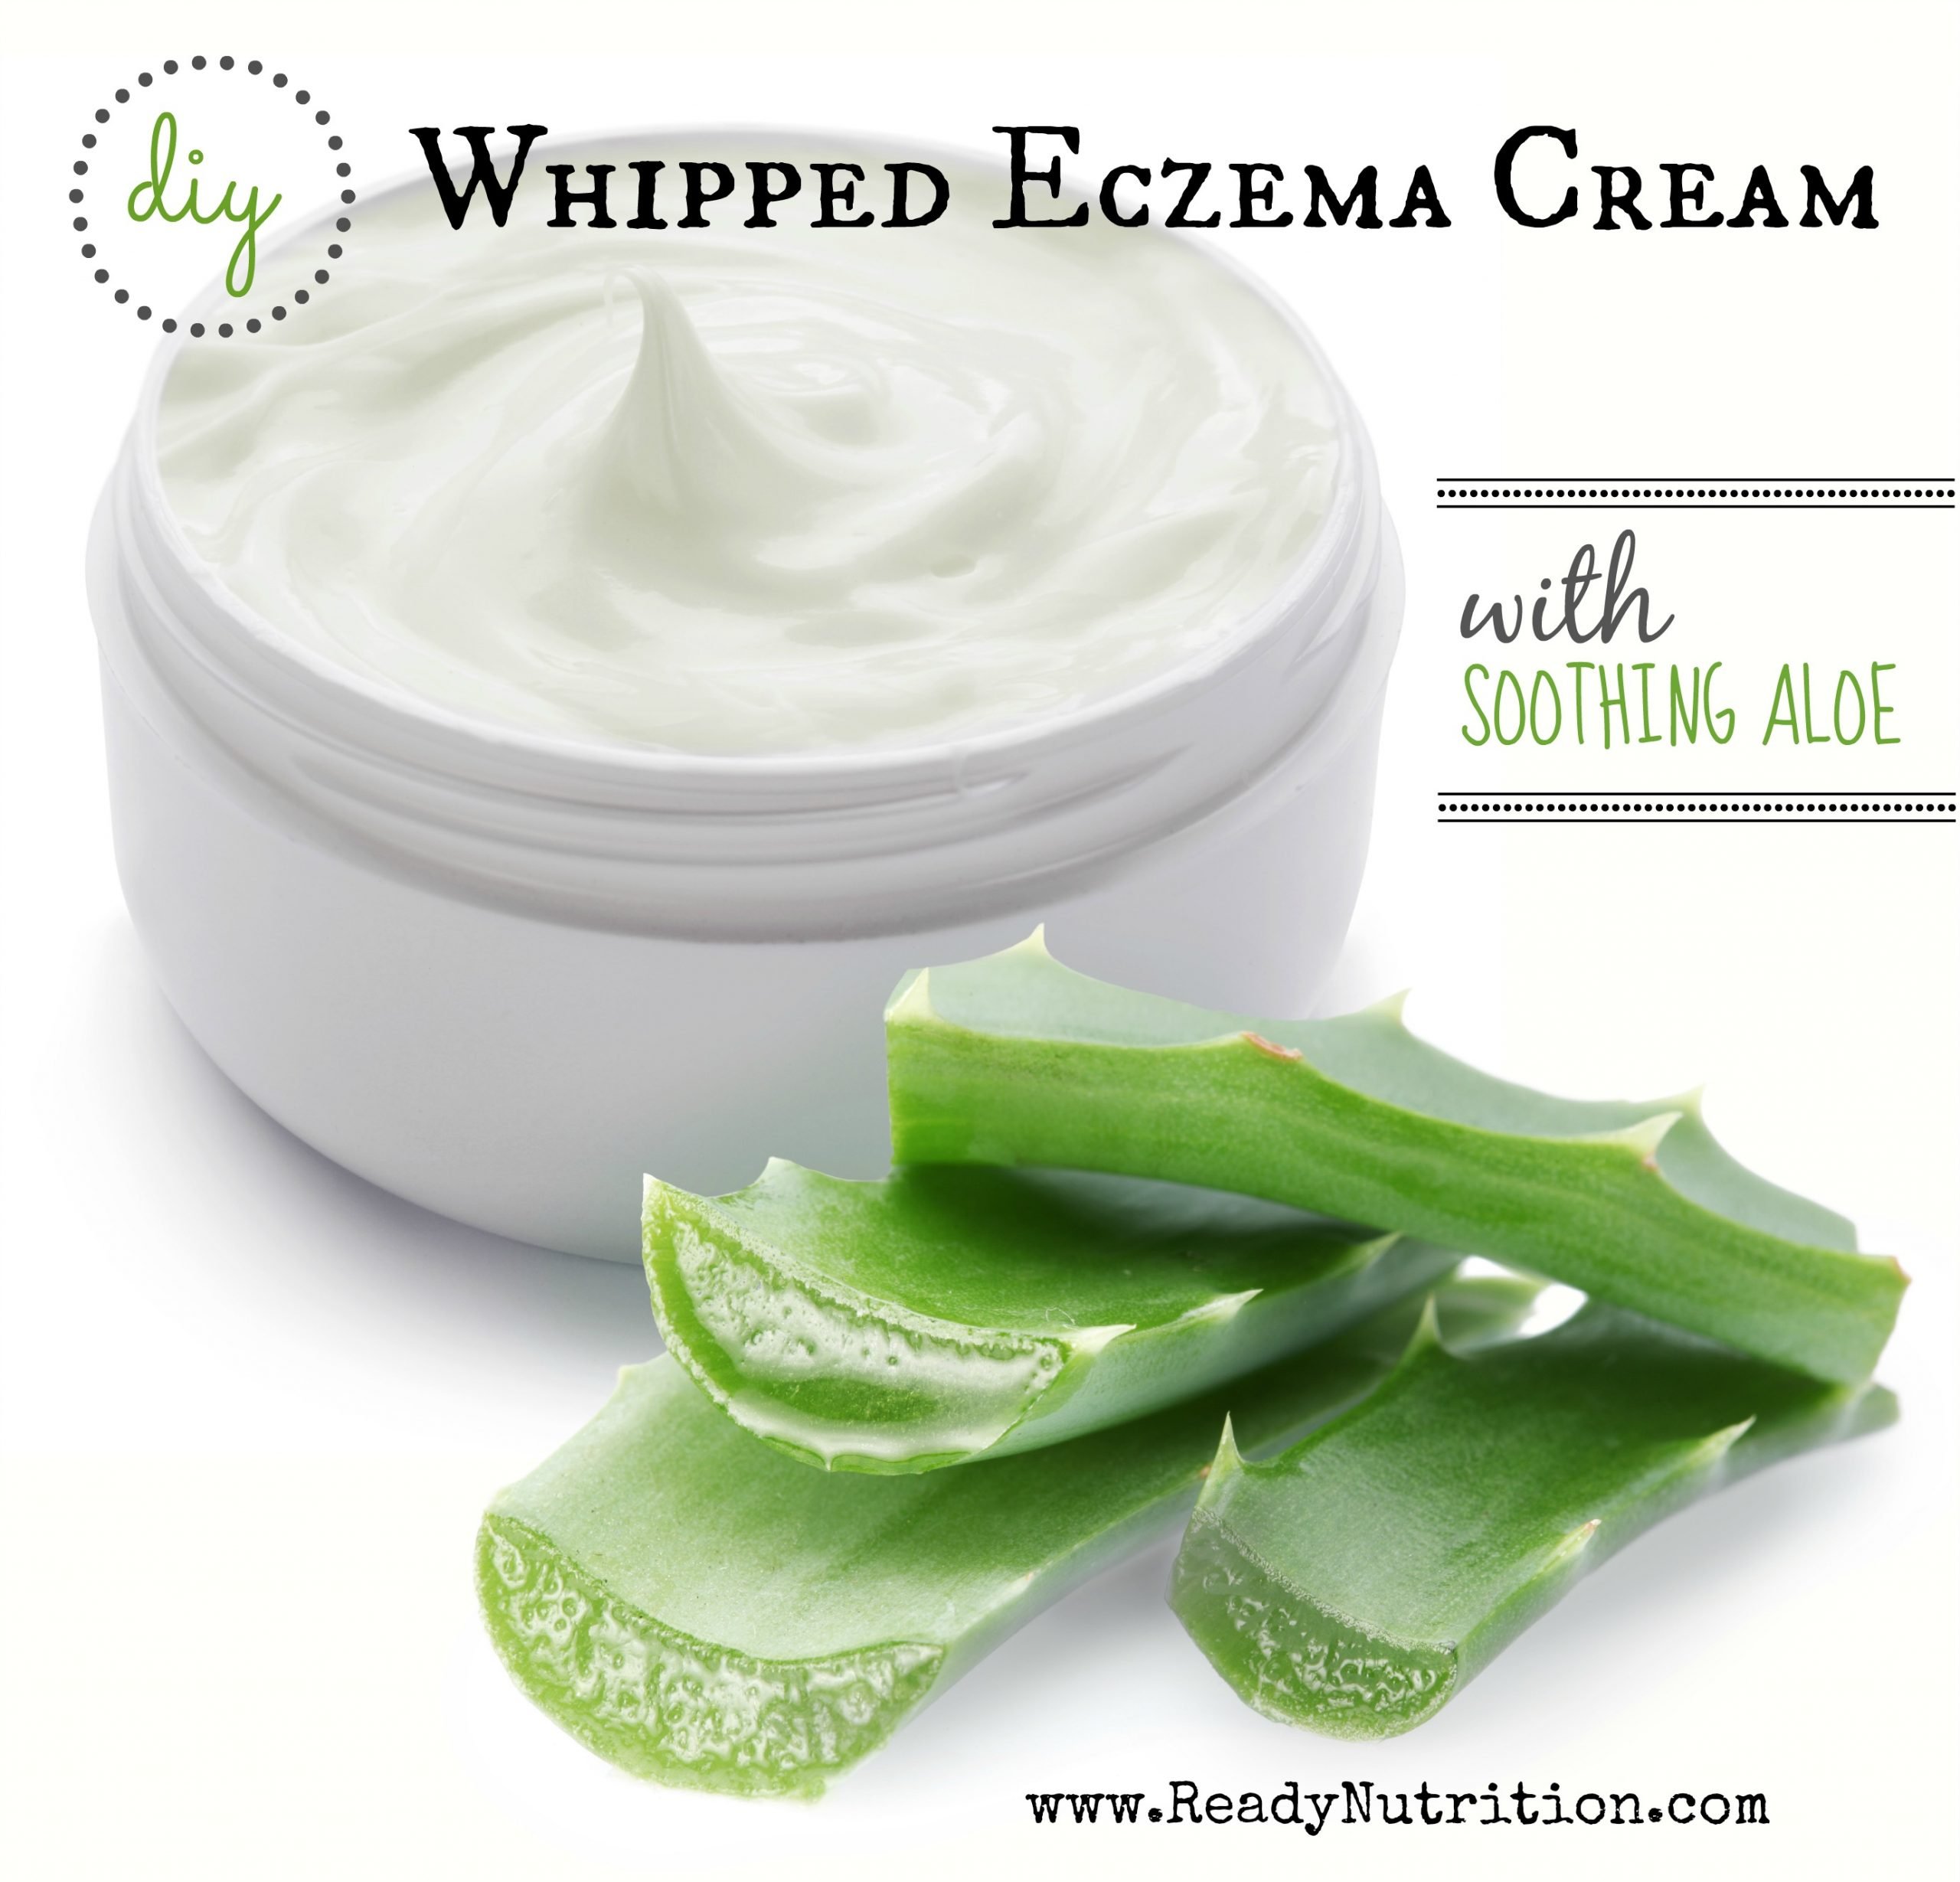 DIY: Whipped Eczema Cream With Soothing Aloe